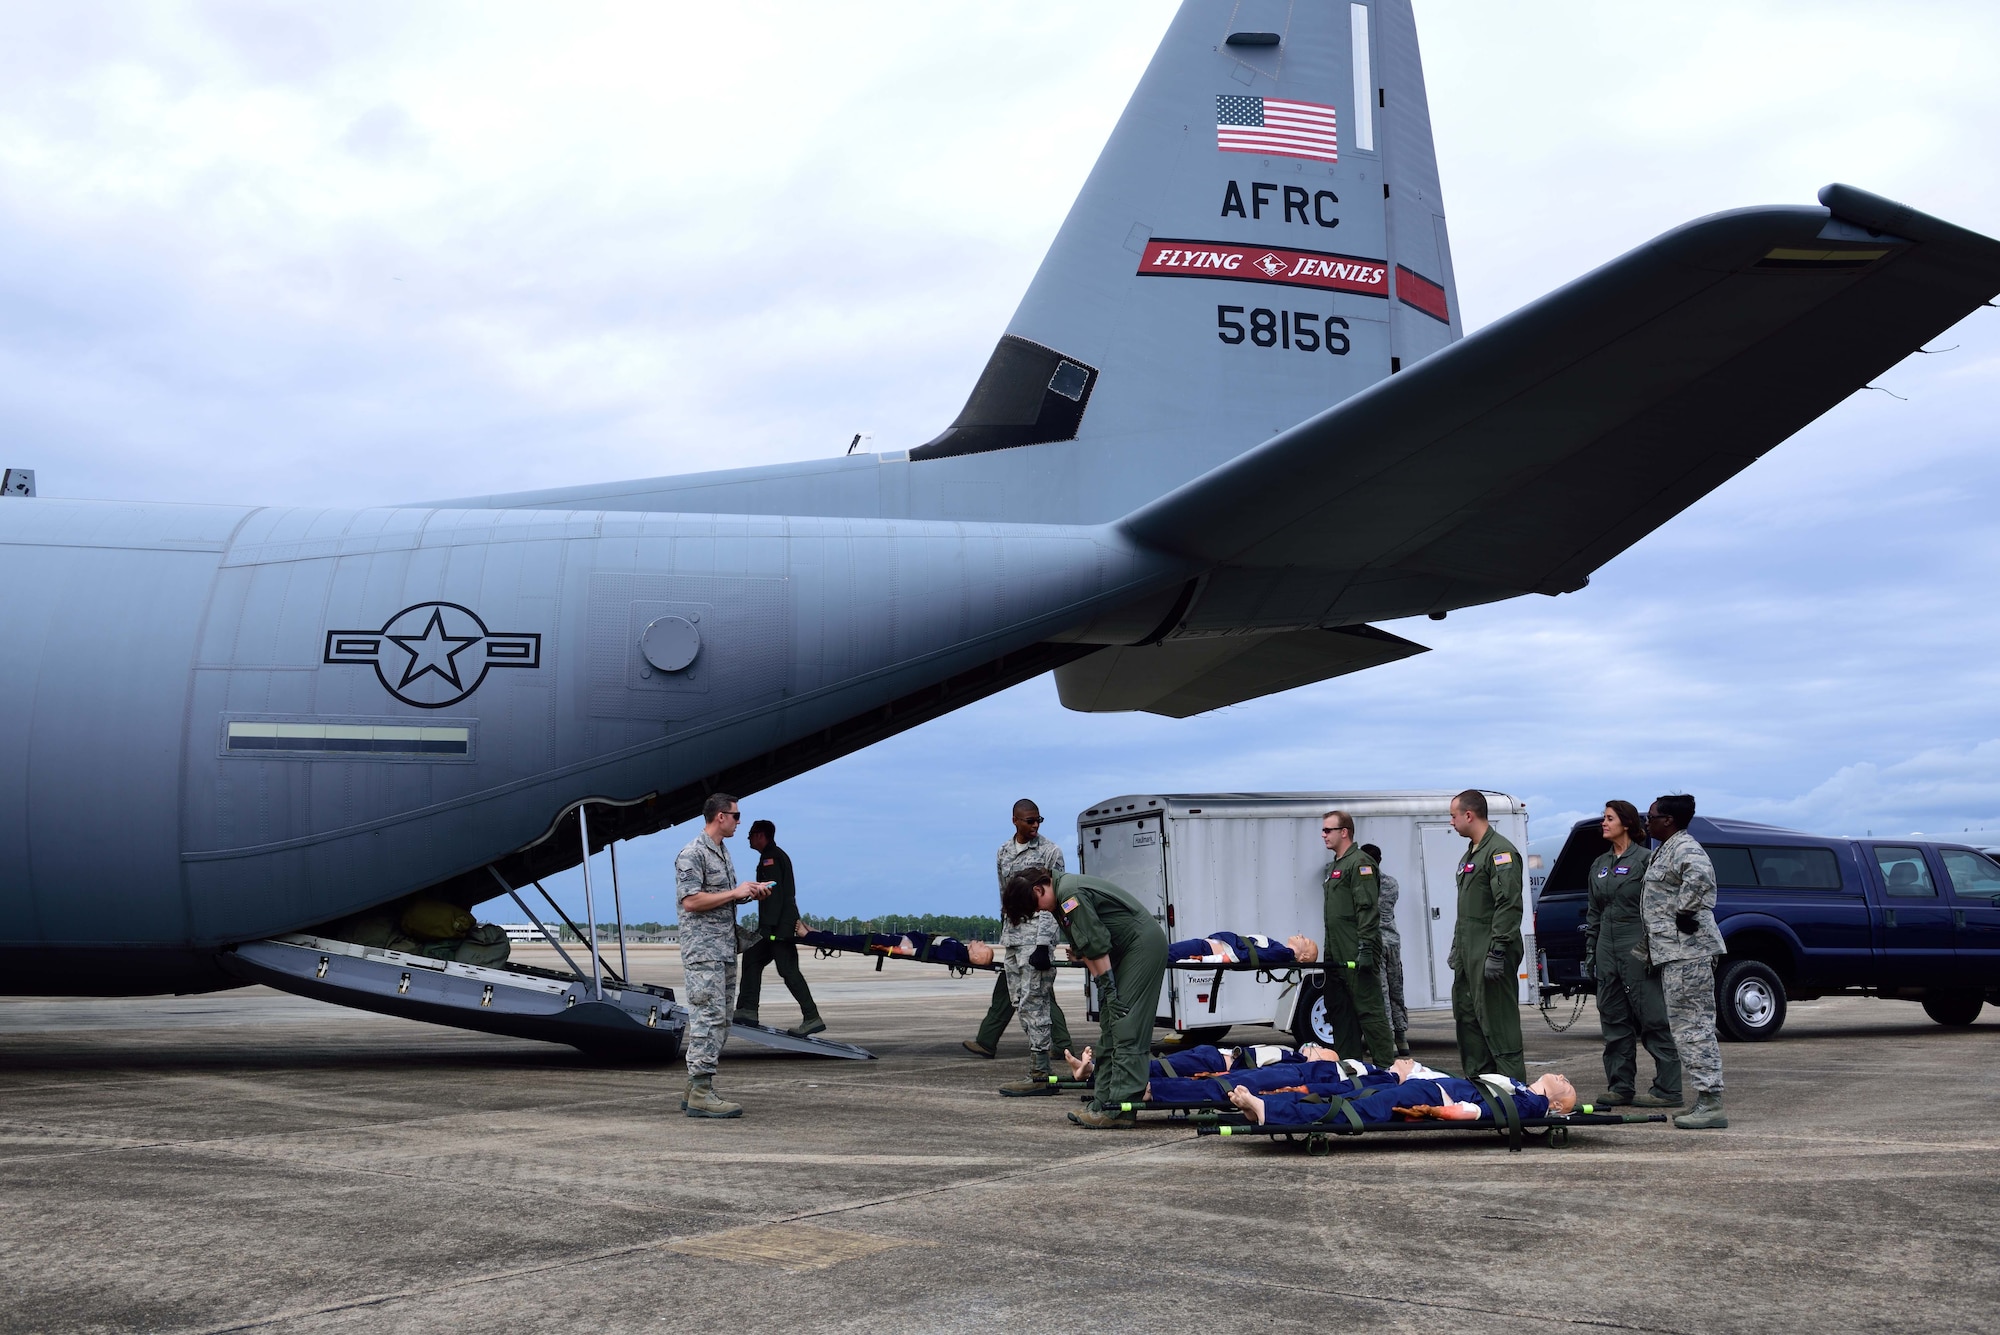 Members from various aeromedical evacuation squadrons load simulated patients onto an 815th Airlift Squadron C-130 Super Hercules aircraft at the Gulfport Combat Readiness Training Center, Mississippi, during an aeromedical evacuation exercise Nov. 1, 2017, for Southern Strike 2018. Southern Strike 2018 is a large-scale, joint multinational combat exercise that provides tactical level training for the full spectrum of conflict and emphasizes air dominance, maritime operations, maritime air support, precision engagement, close air support, command and control, personnel recovery, aeromedical evacuation, and combat medical support. (U.S. Air Force photo by Tech. Sgt. Ryan Labadens)